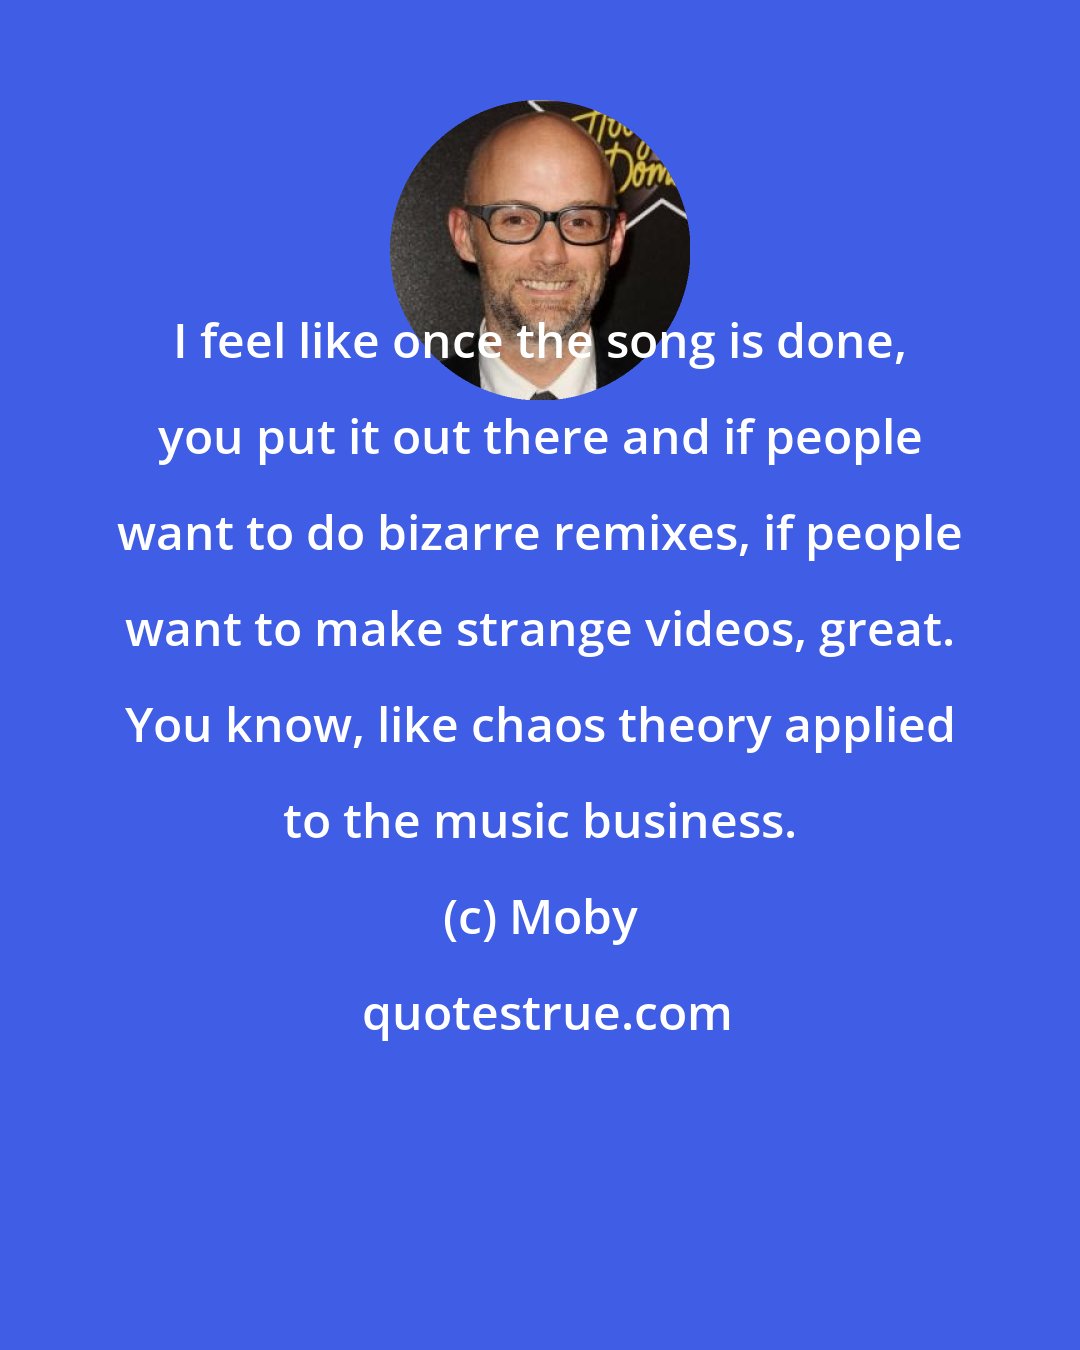 Moby: I feel like once the song is done, you put it out there and if people want to do bizarre remixes, if people want to make strange videos, great. You know, like chaos theory applied to the music business.